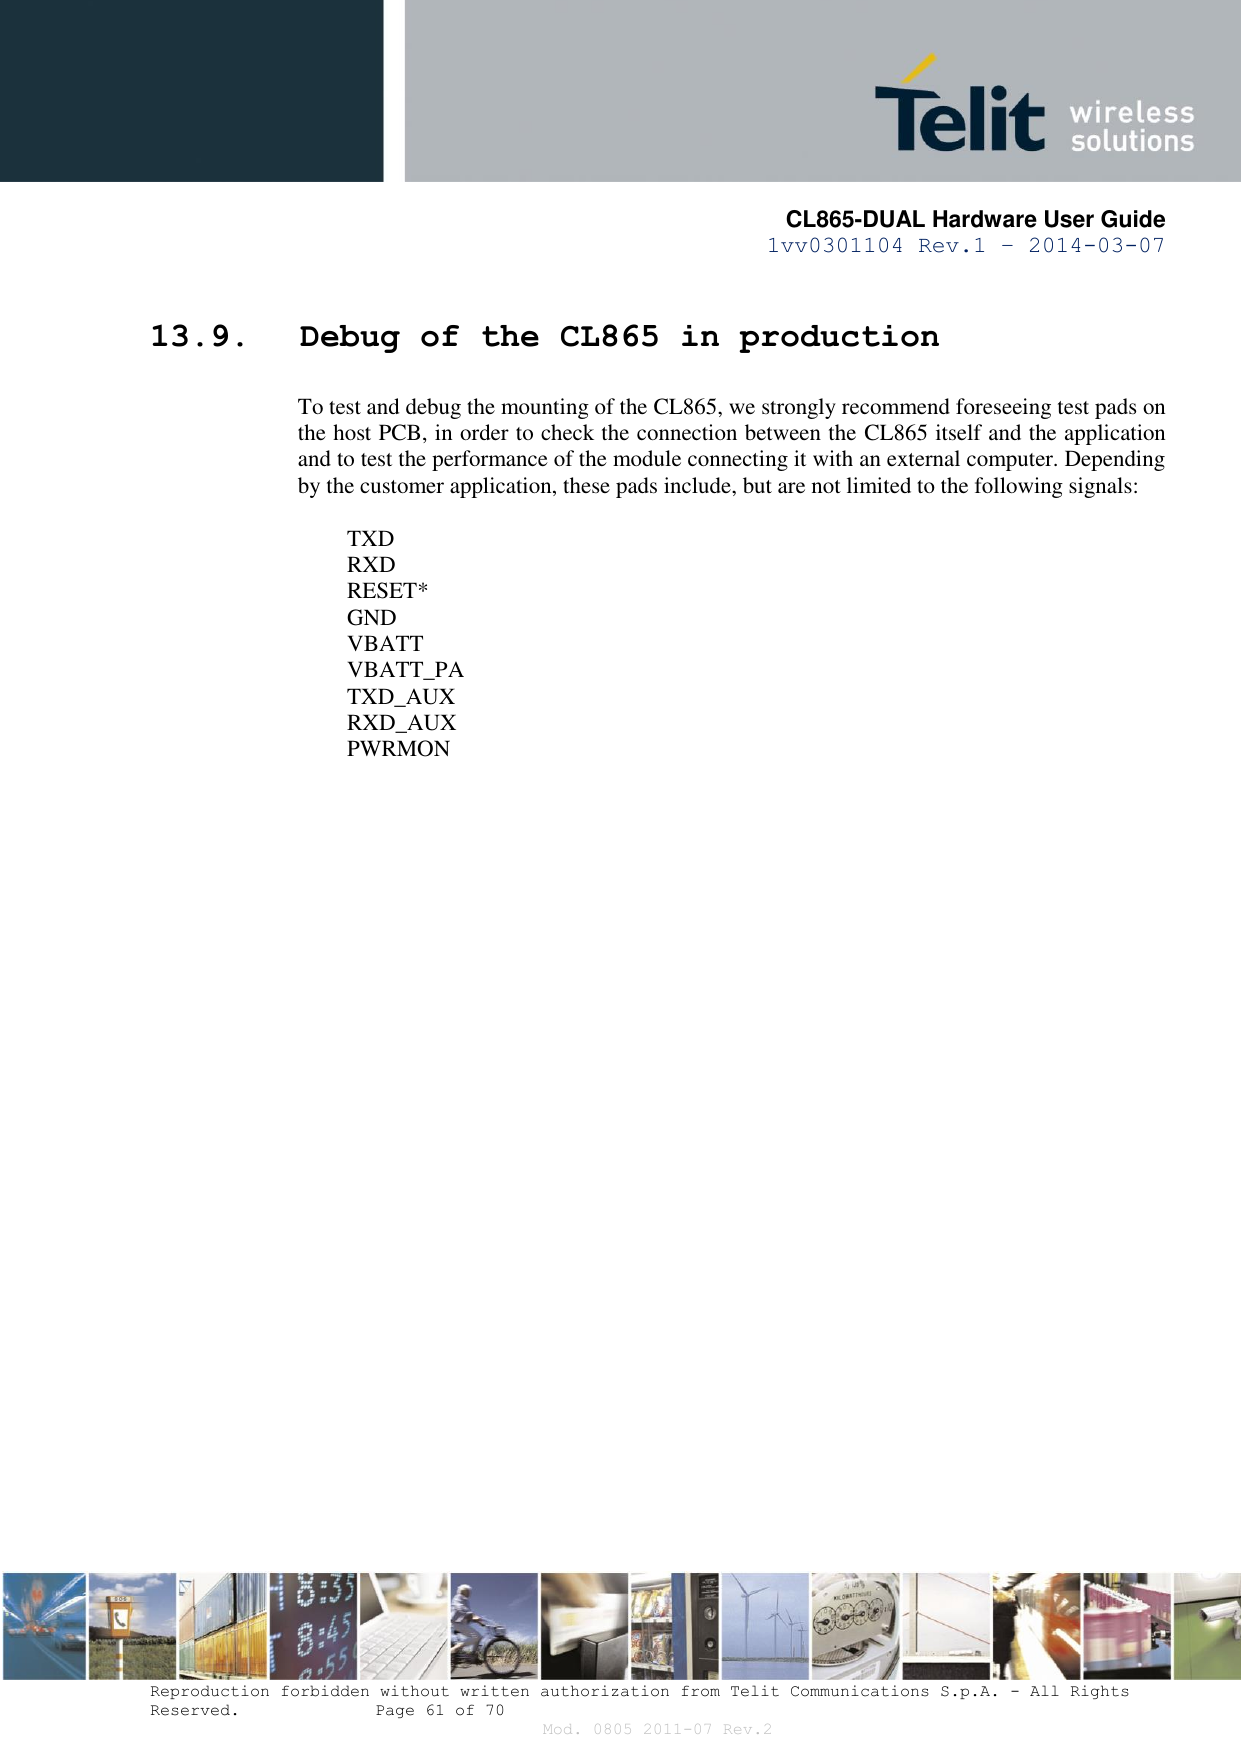       CL865-DUAL Hardware User Guide 1vv0301104 Rev.1 – 2014-03-07  Reproduction forbidden without written authorization from Telit Communications S.p.A. - All Rights Reserved.    Page 61 of 70 Mod. 0805 2011-07 Rev.2 13.9. Debug of the CL865 in production To test and debug the mounting of the CL865, we strongly recommend foreseeing test pads on the host PCB, in order to check the connection between the CL865 itself and the application and to test the performance of the module connecting it with an external computer. Depending by the customer application, these pads include, but are not limited to the following signals:   TXD  RXD  RESET*  GND  VBATT  VBATT_PA  TXD_AUX  RXD_AUX  PWRMON  